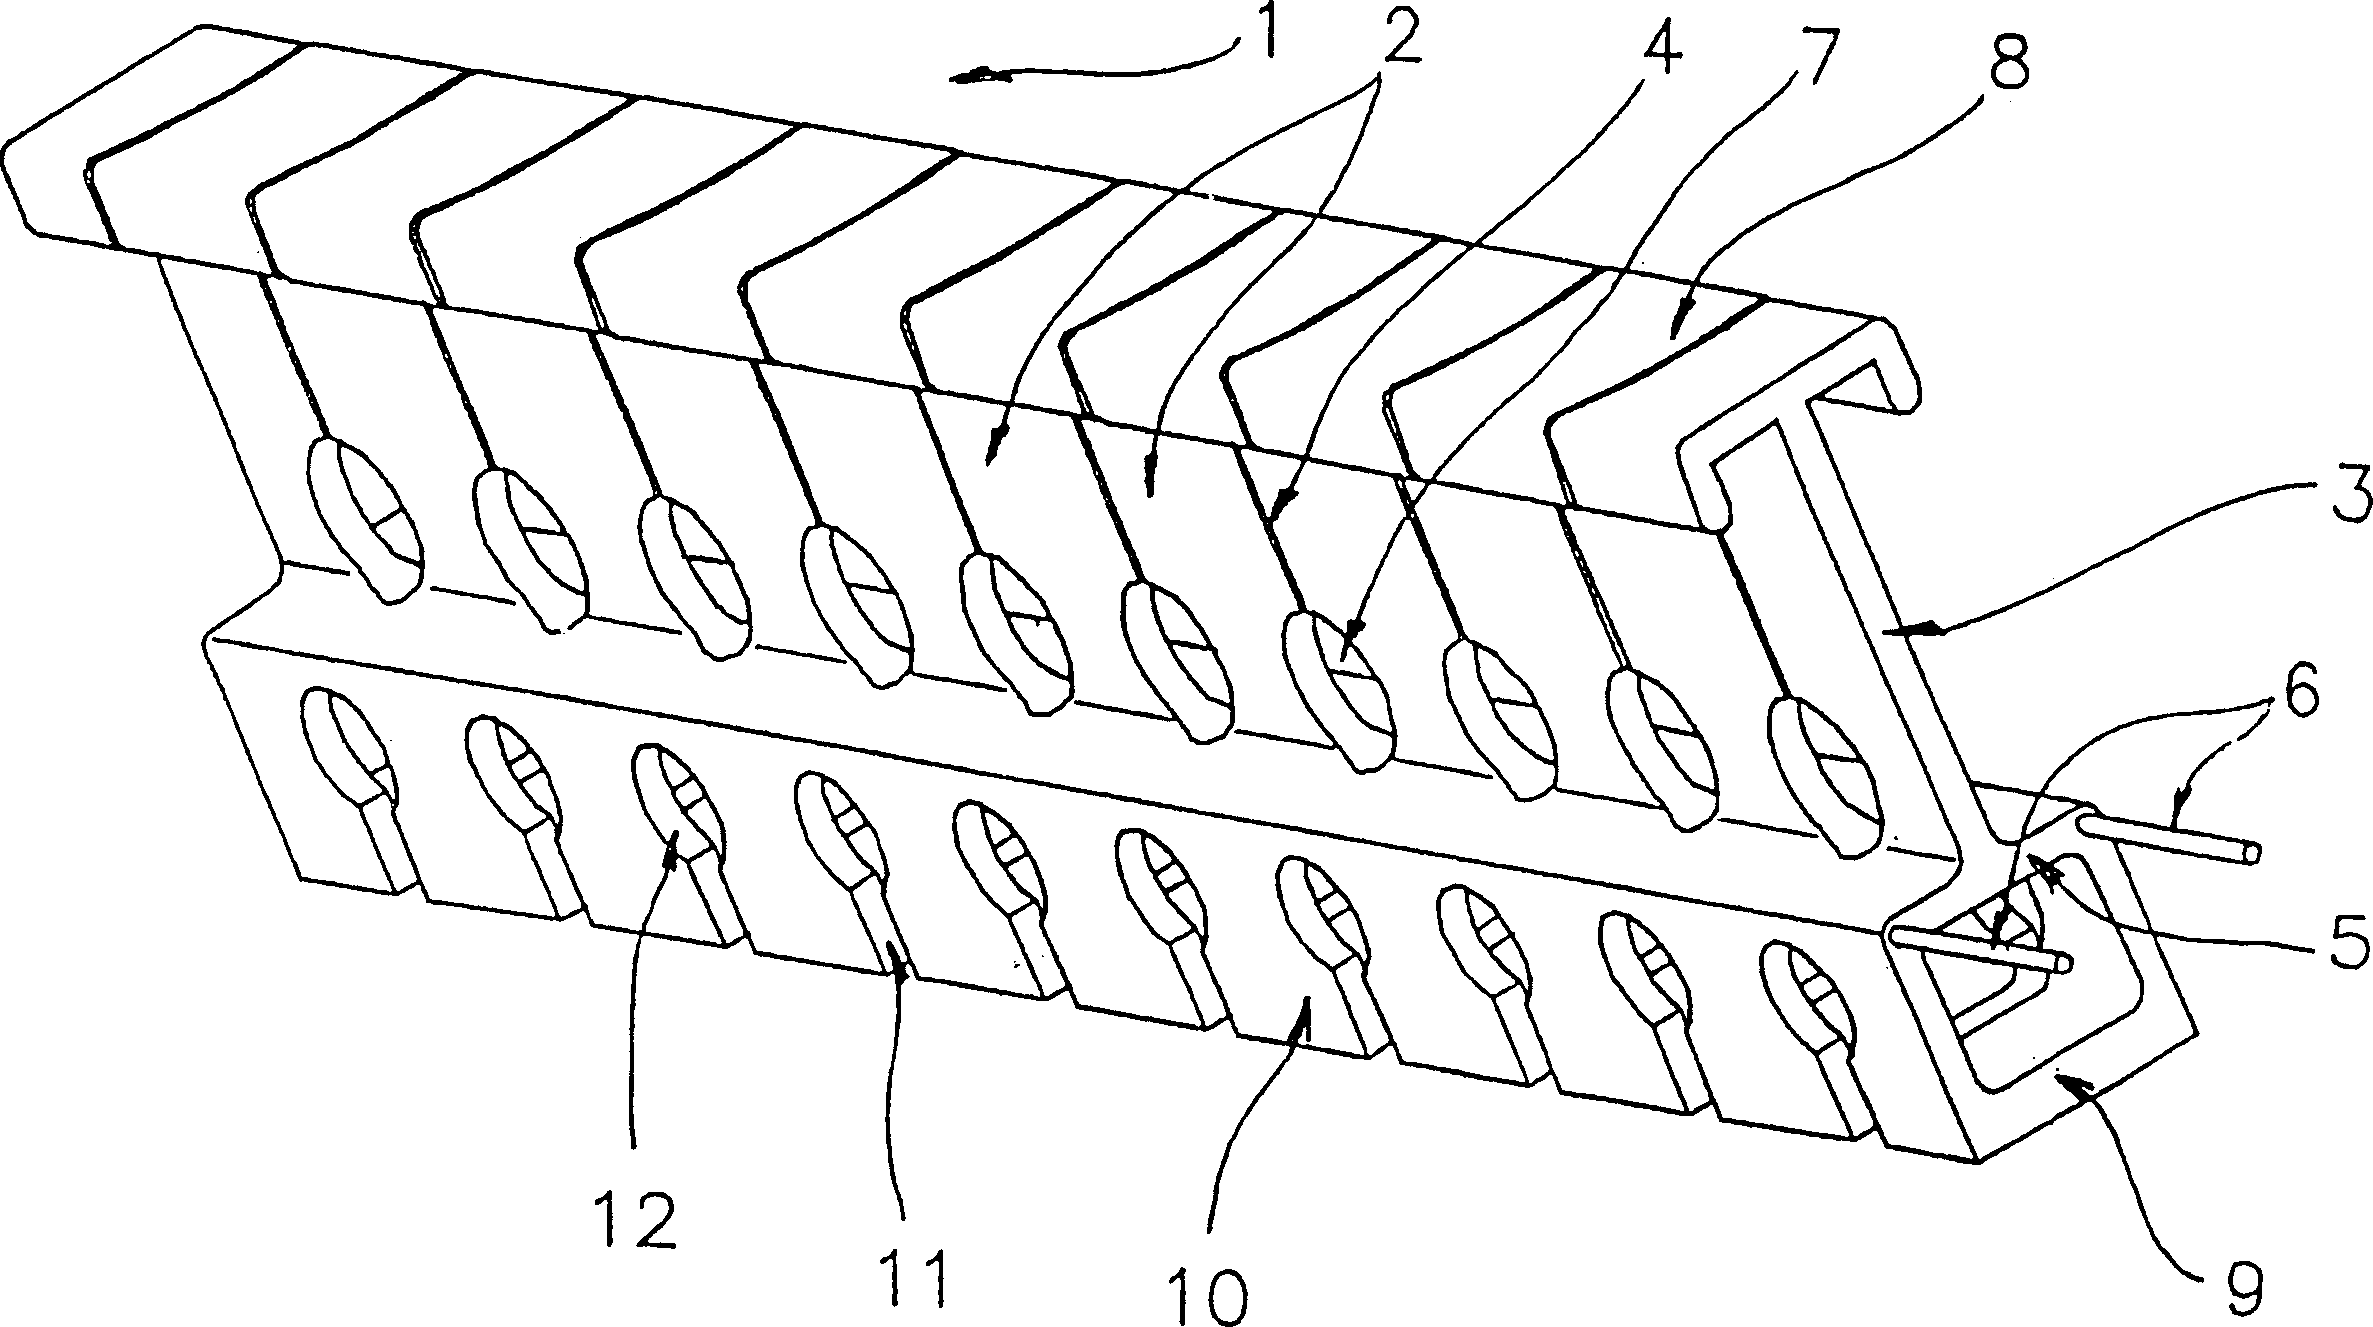 Line and method for producing fibre reinforced line of wiring arrangement